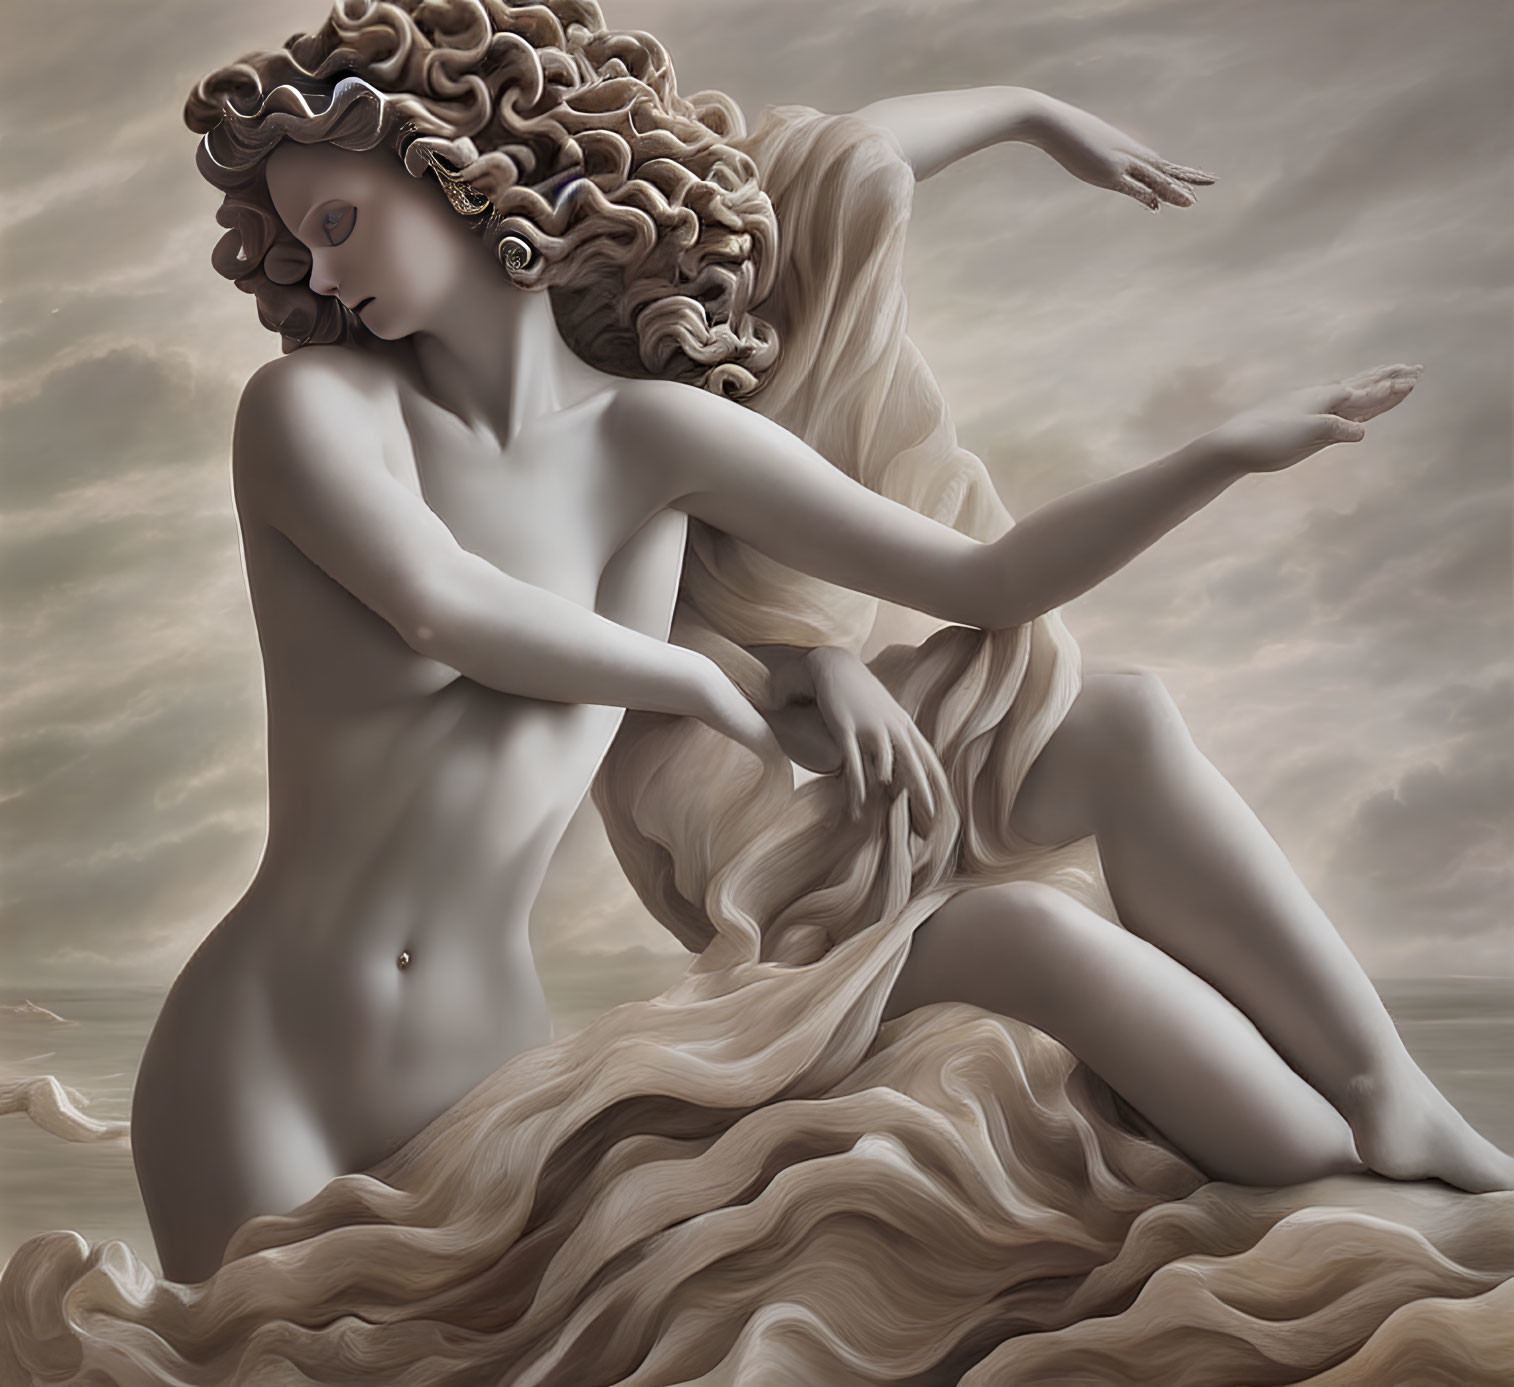 Classical female figure with curly hair and flowing drape against cloudy backdrop